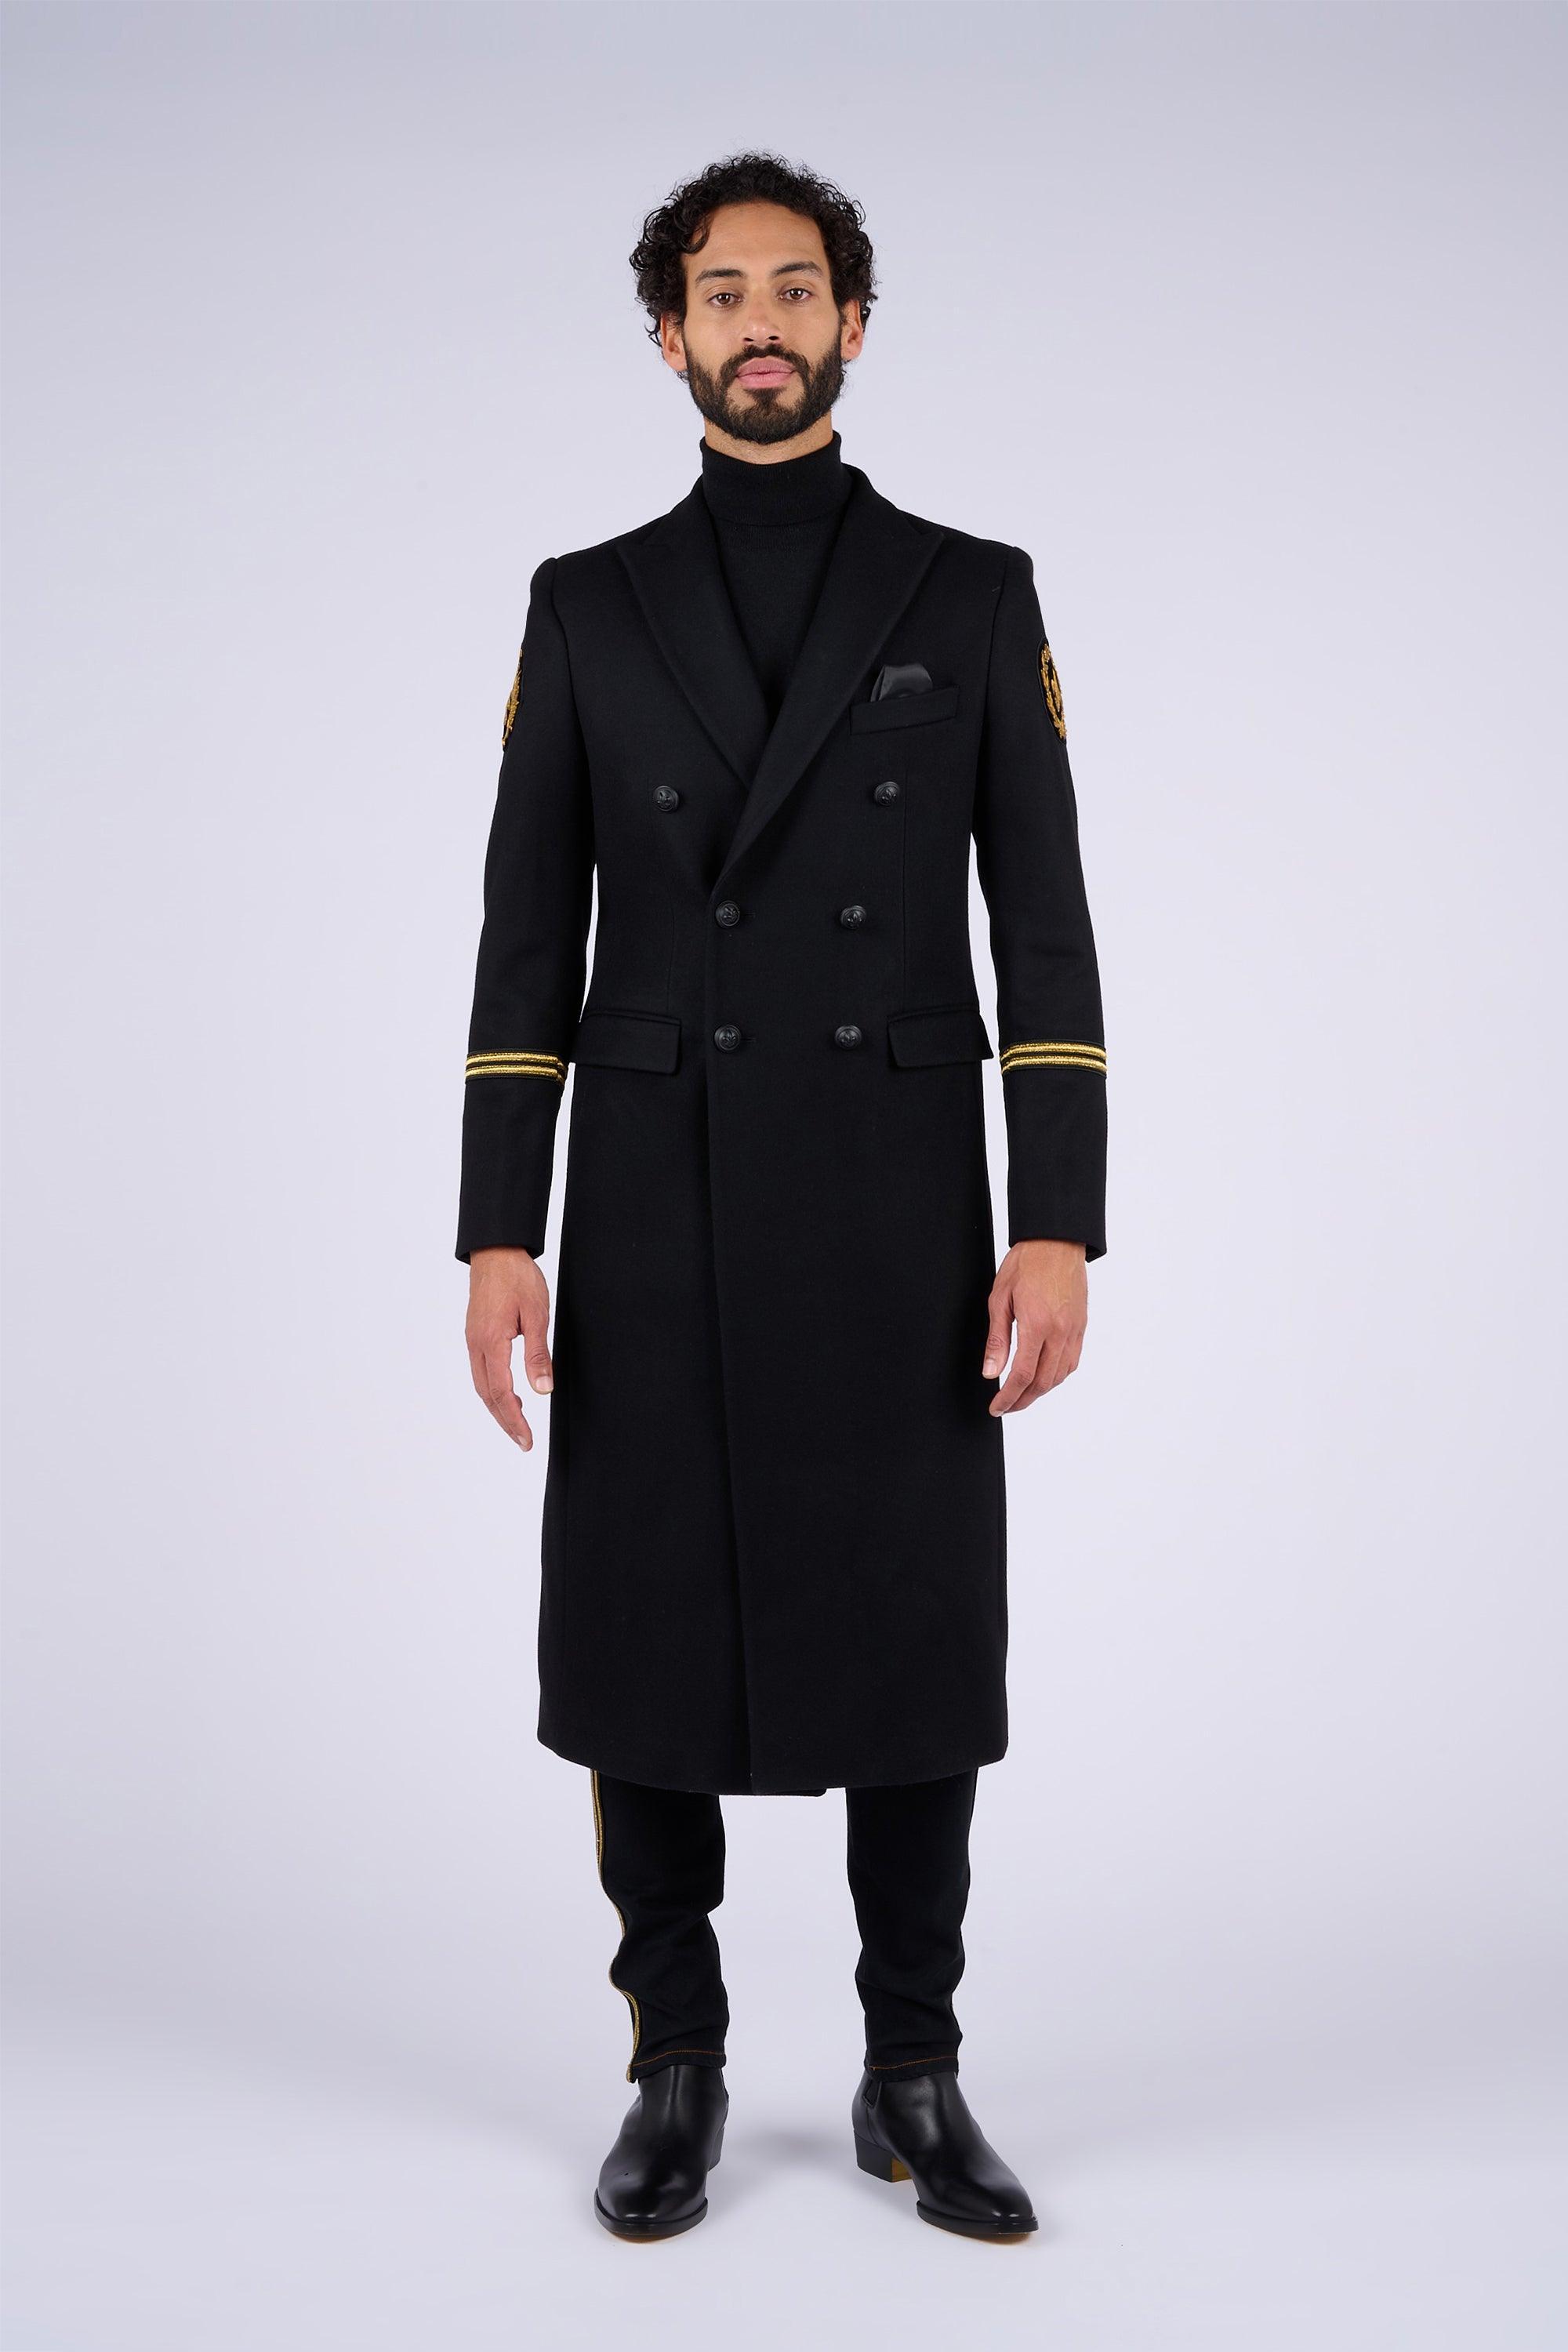 Manteau Impérial - Lords & Fools bonaparte, broderies, dandy, elegance, empire, frenchstyle, menfashion, menstyle, New collection, suit, tailoring